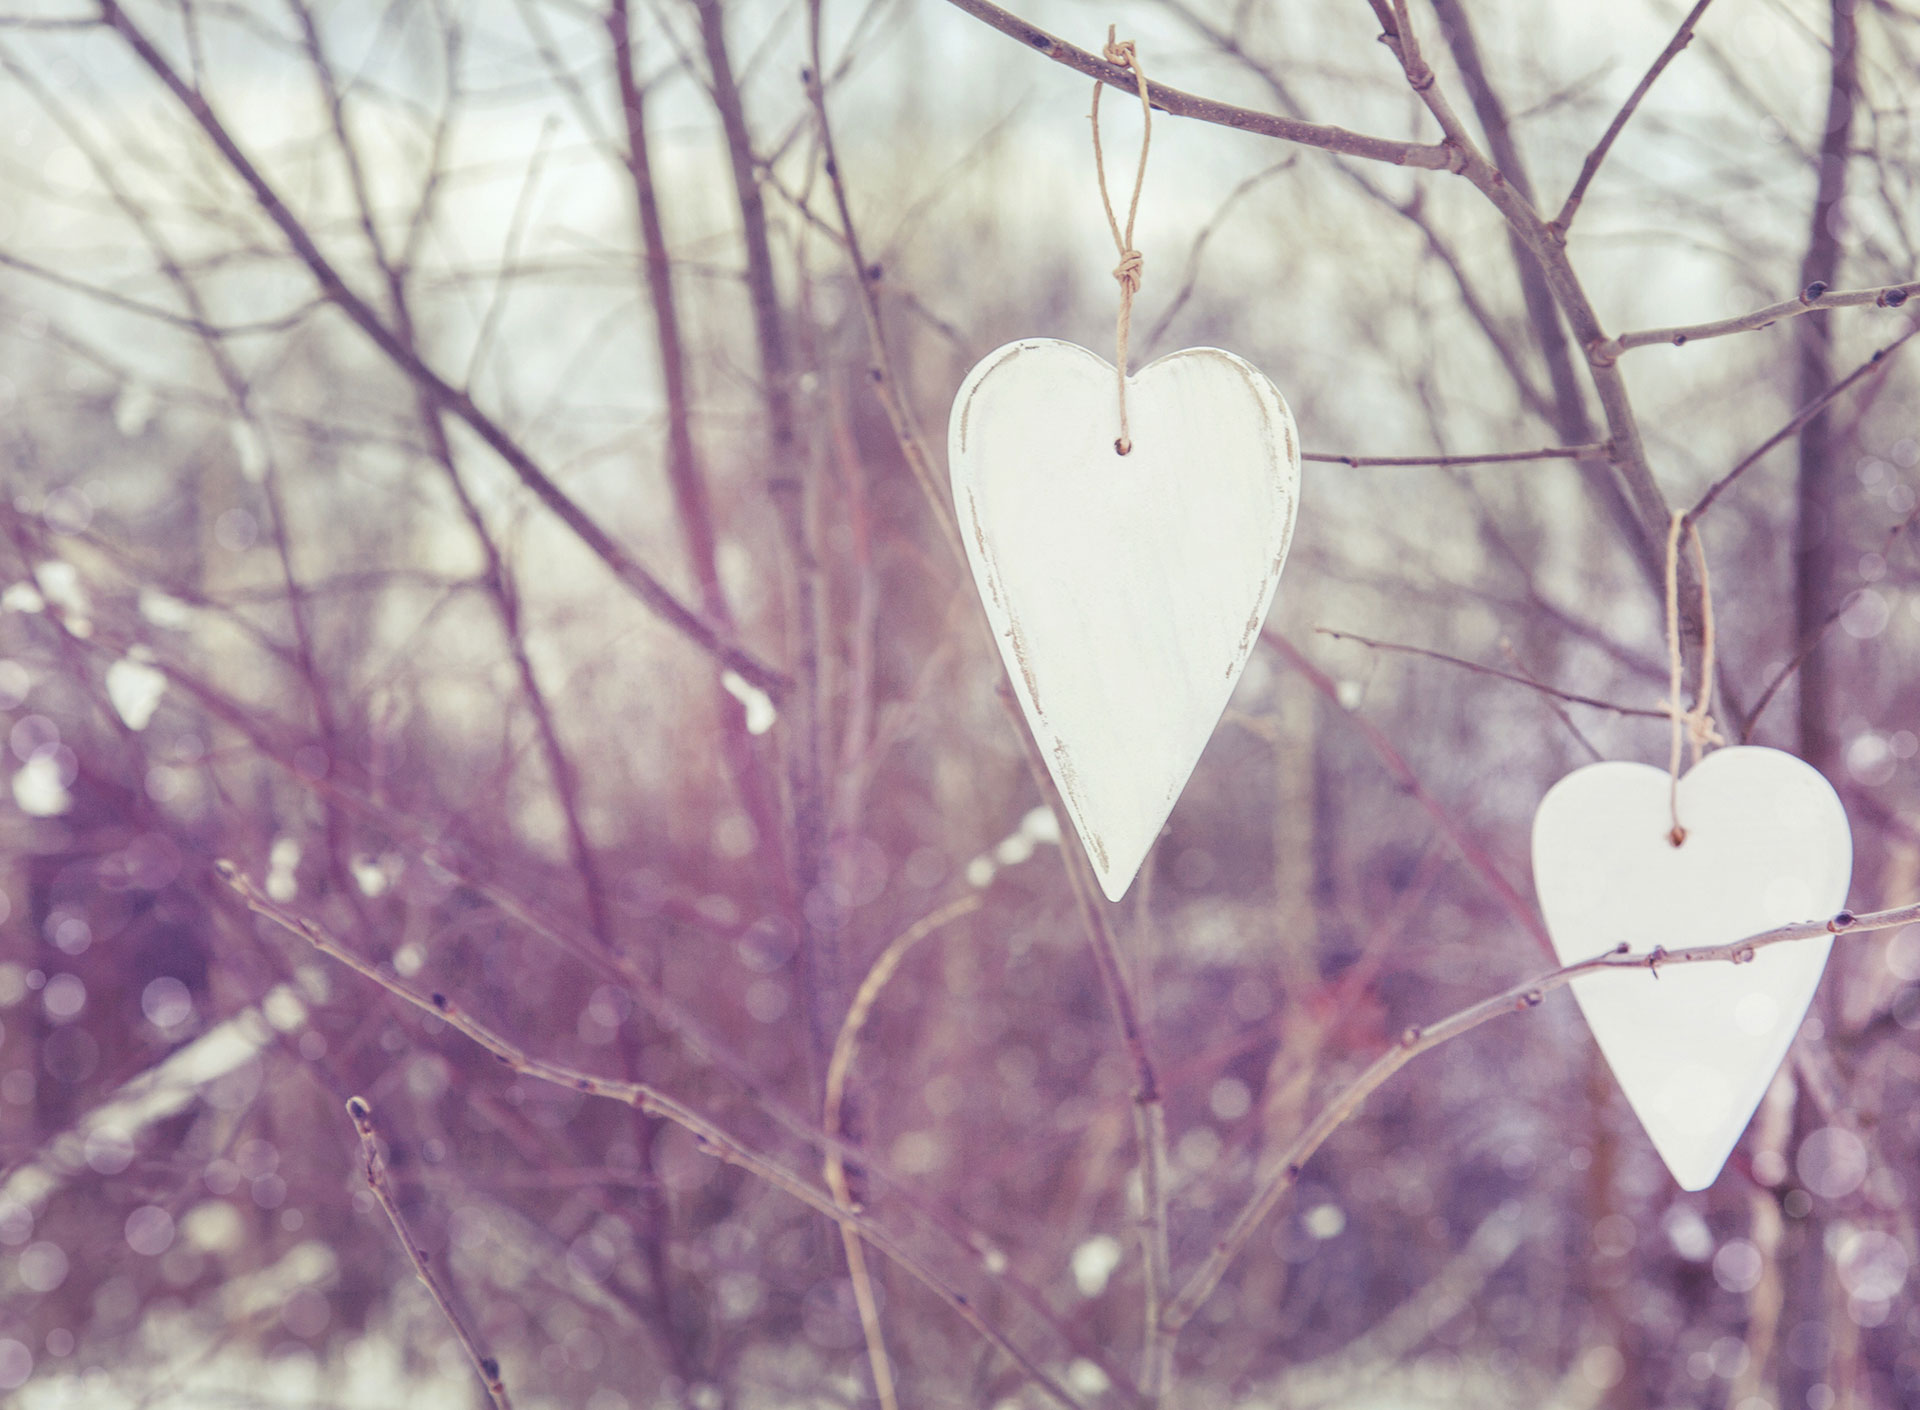 Wooden hearts on a string hanging from winter branches